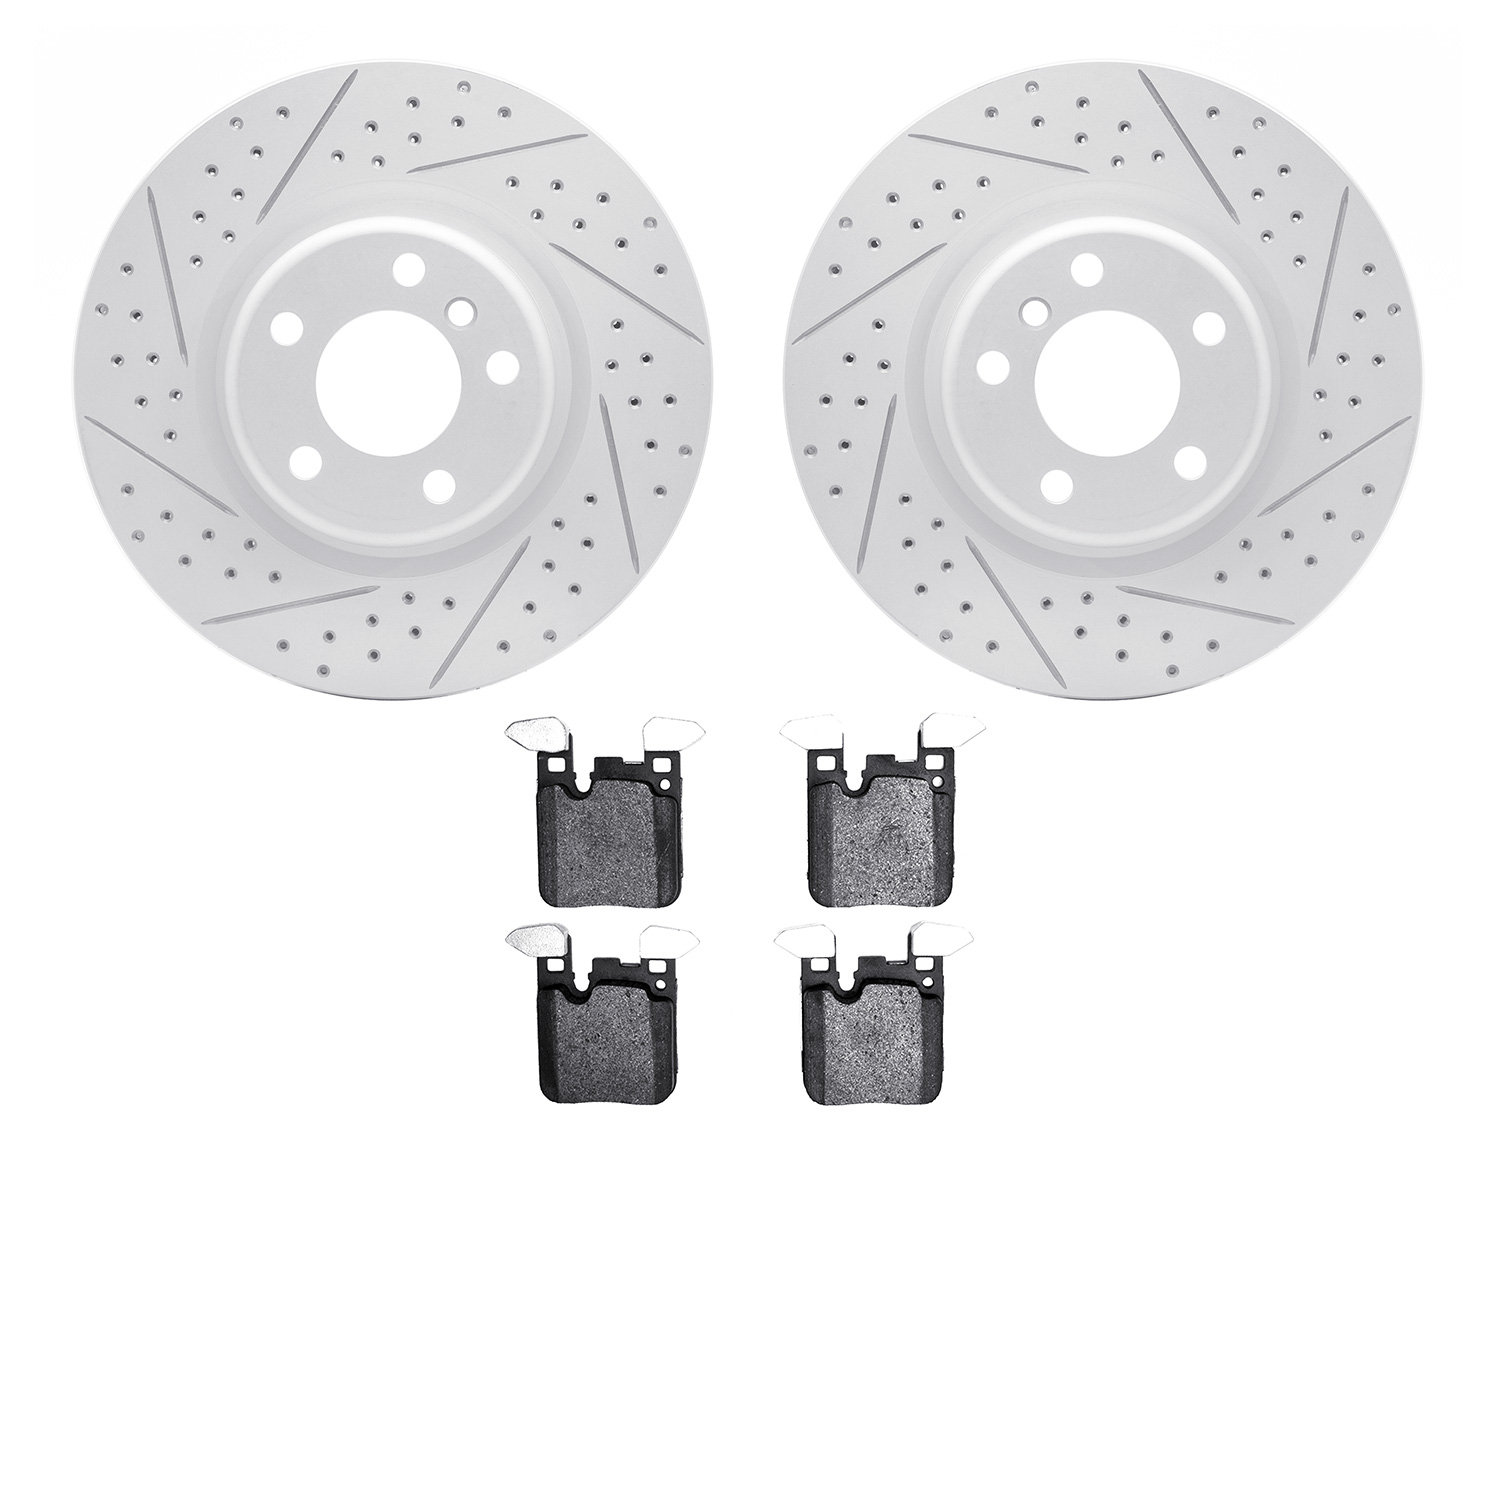 2502-31098 Geoperformance Drilled/Slotted Rotors w/5000 Advanced Brake Pads Kit, 2012-2020 BMW, Position: Rear